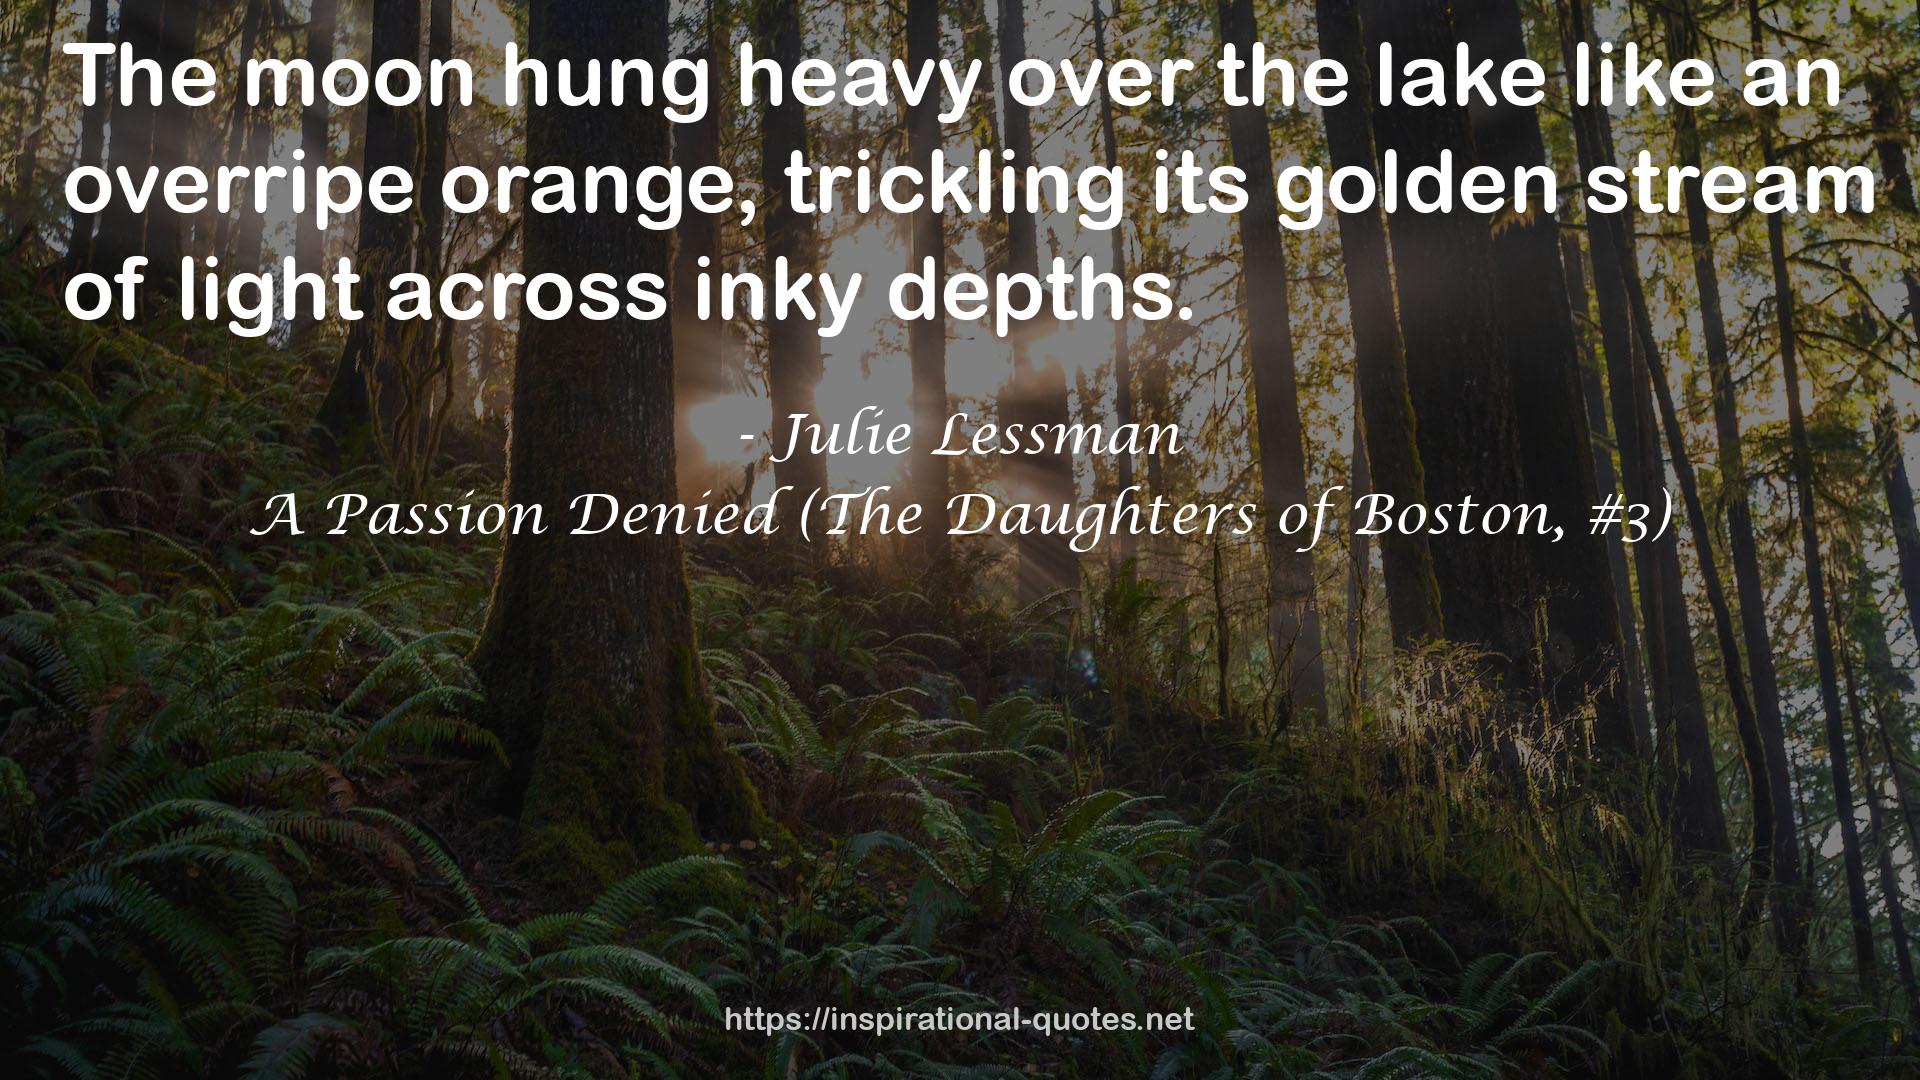 A Passion Denied (The Daughters of Boston, #3) QUOTES